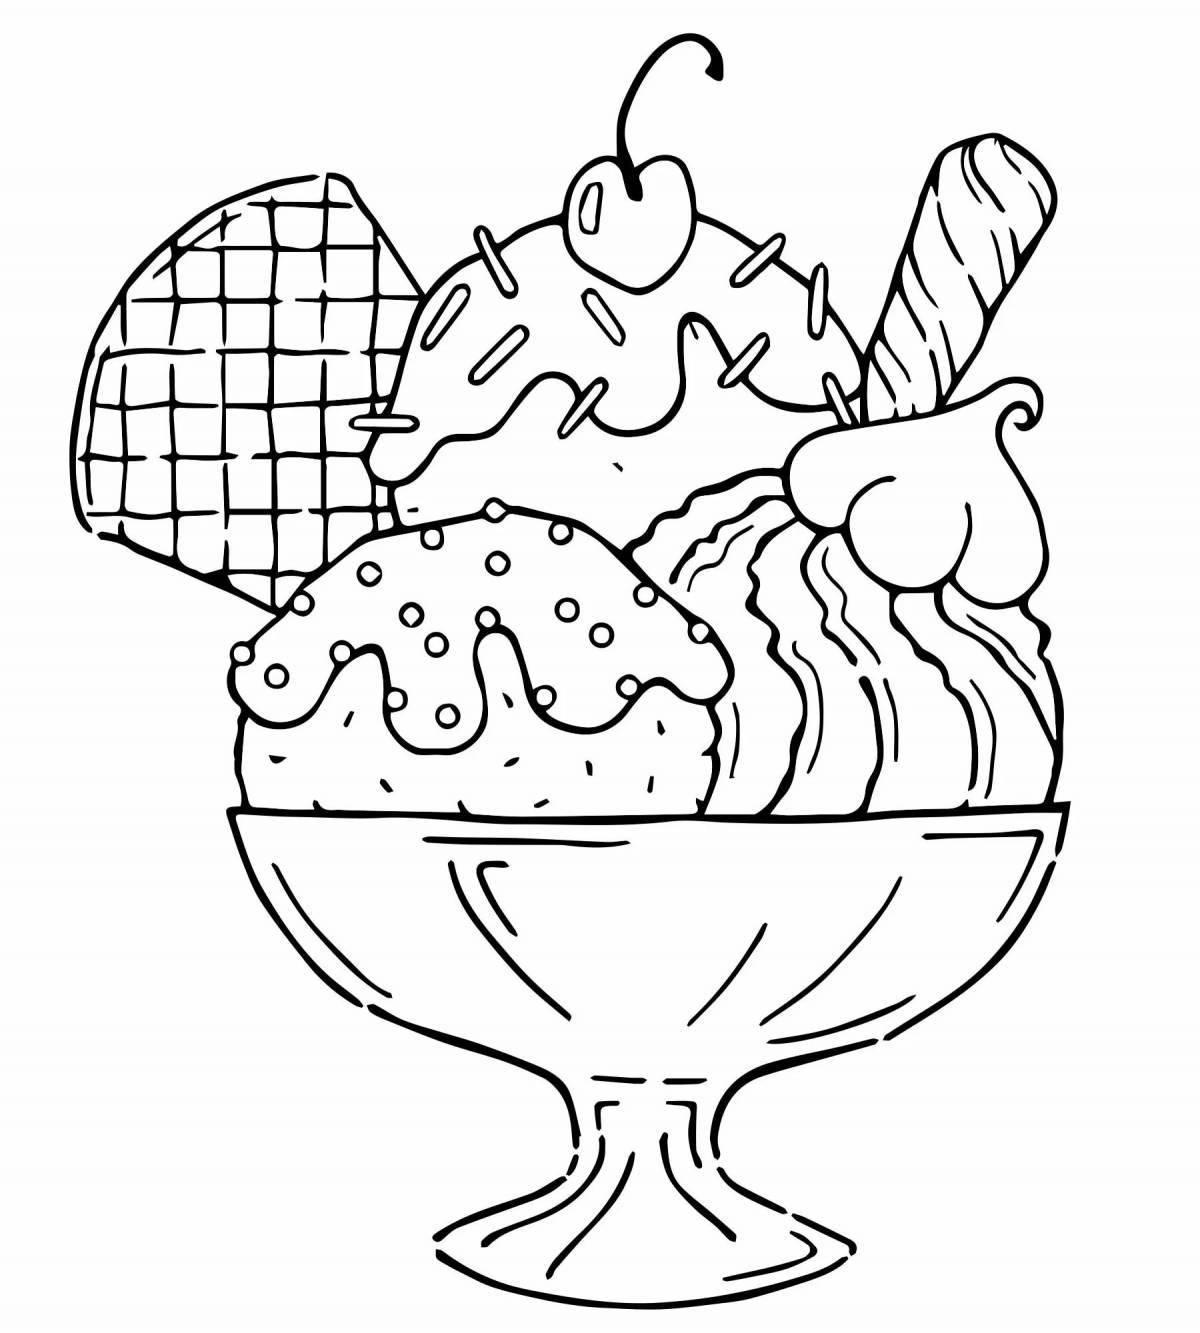 Fun coloring pages for girls with ice cream